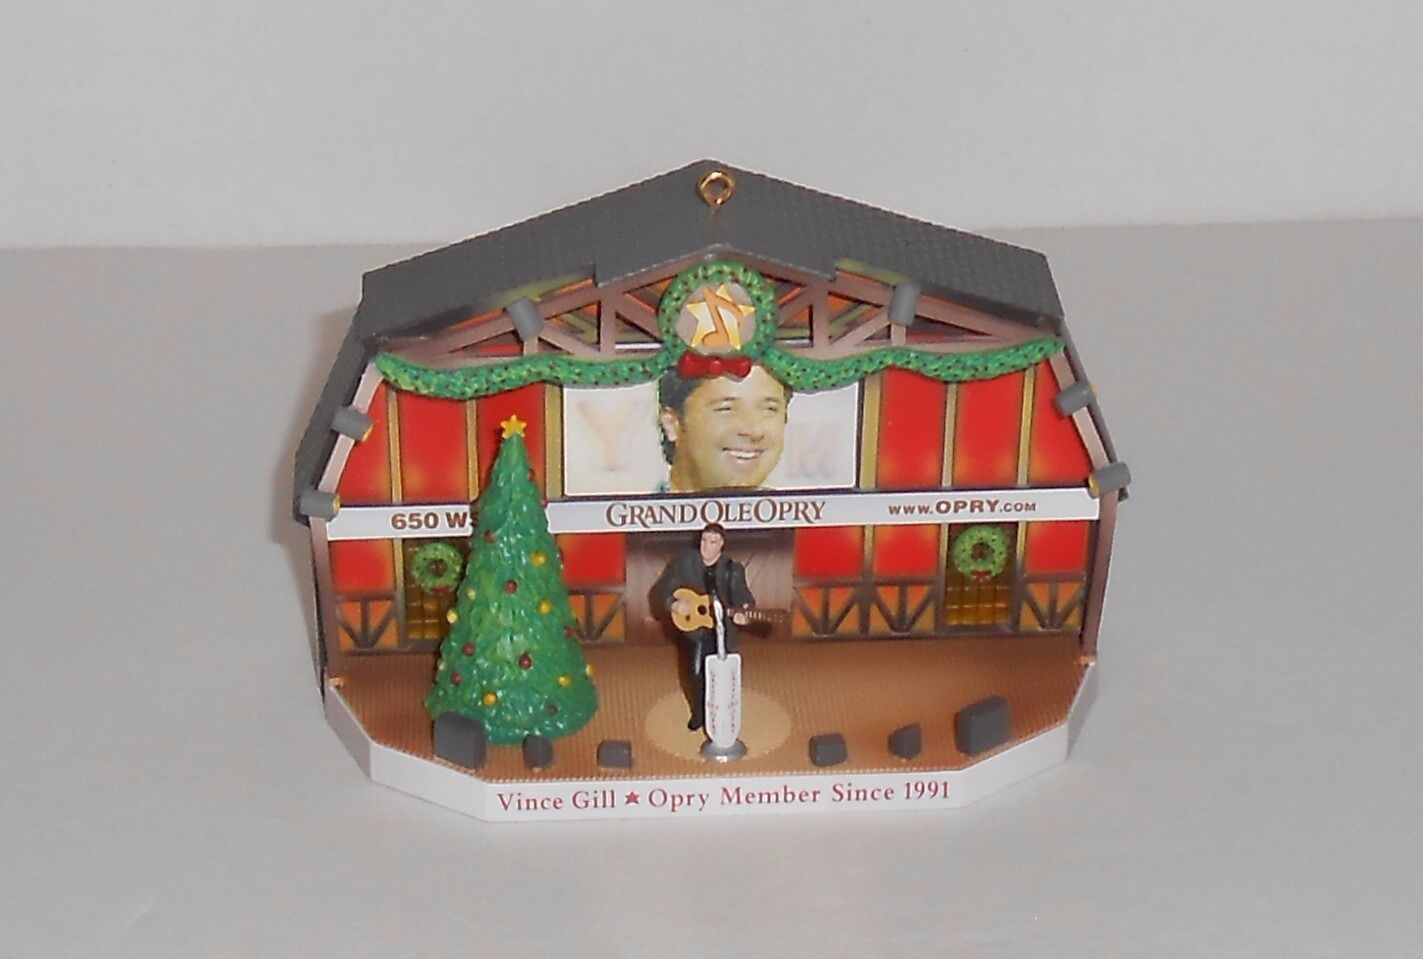 Carlton Cards 2006 Grand Ole Opry Country Superstar Vince Gill Ornament NEW